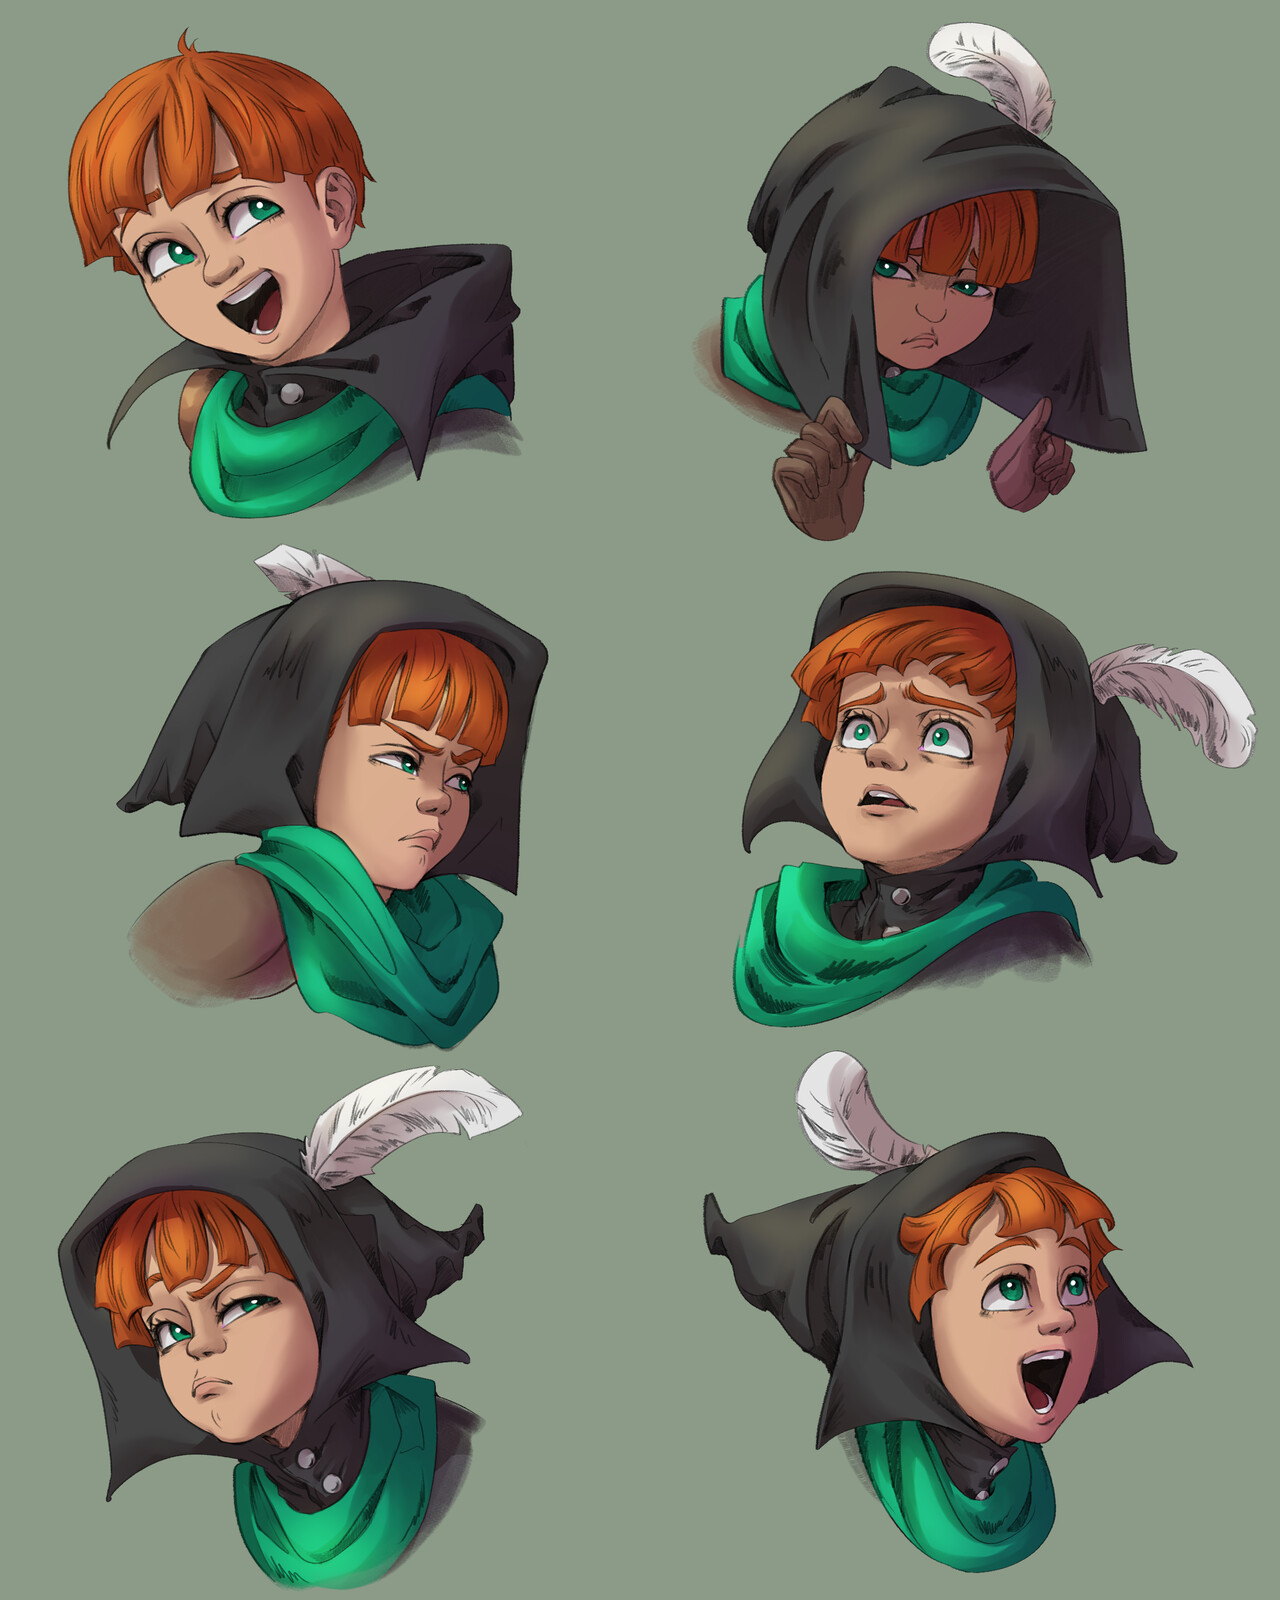 Colored sketches for face expressions.